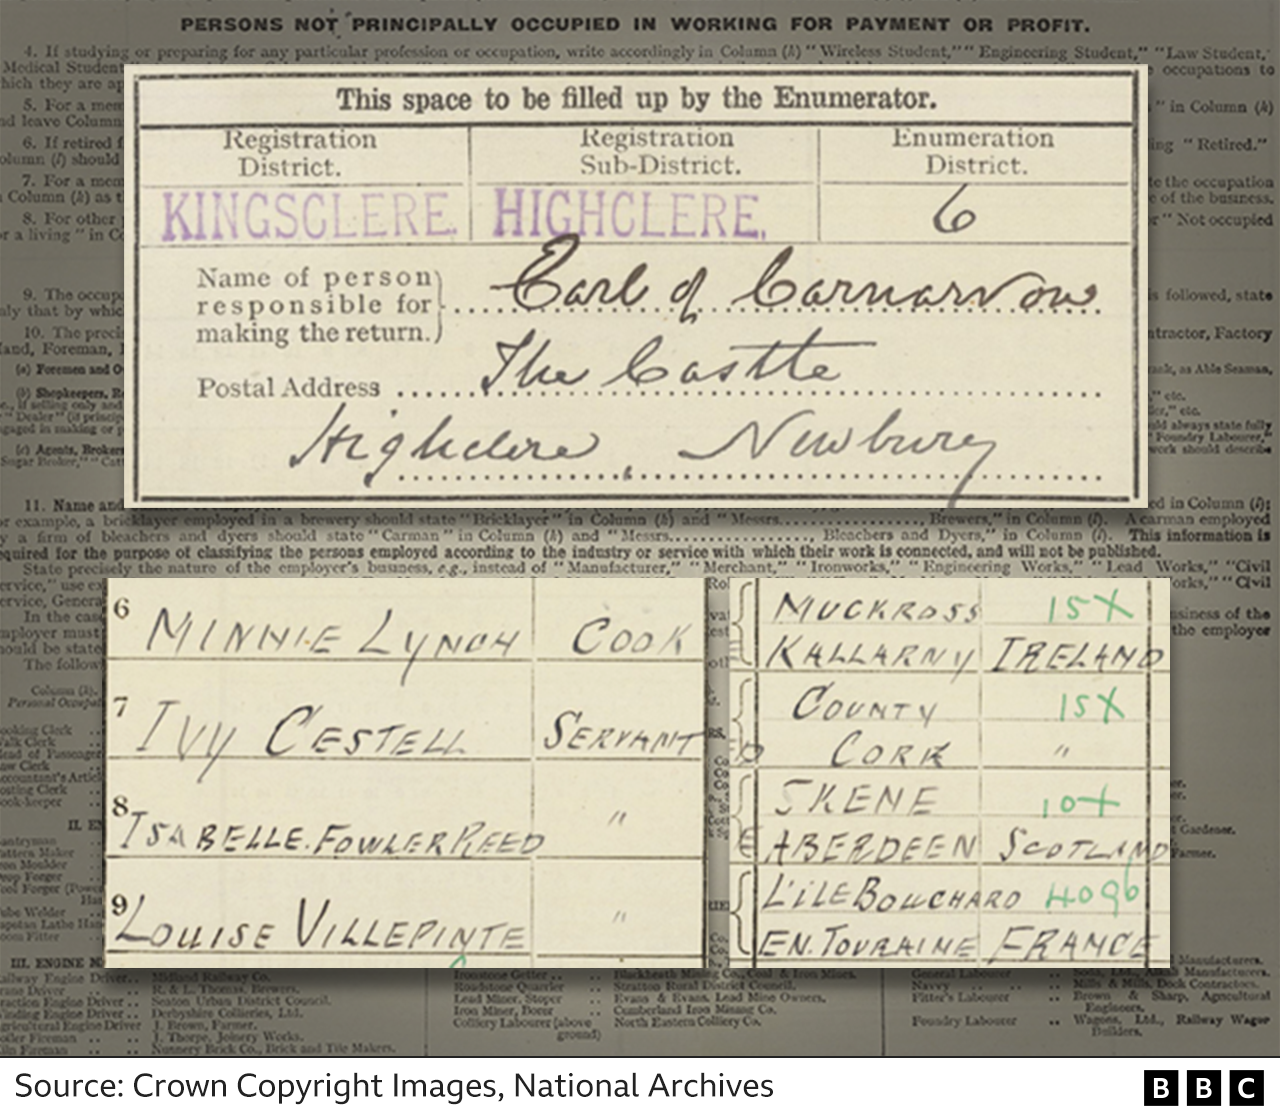 Extracts from Highclere Castle's 1921 Census form